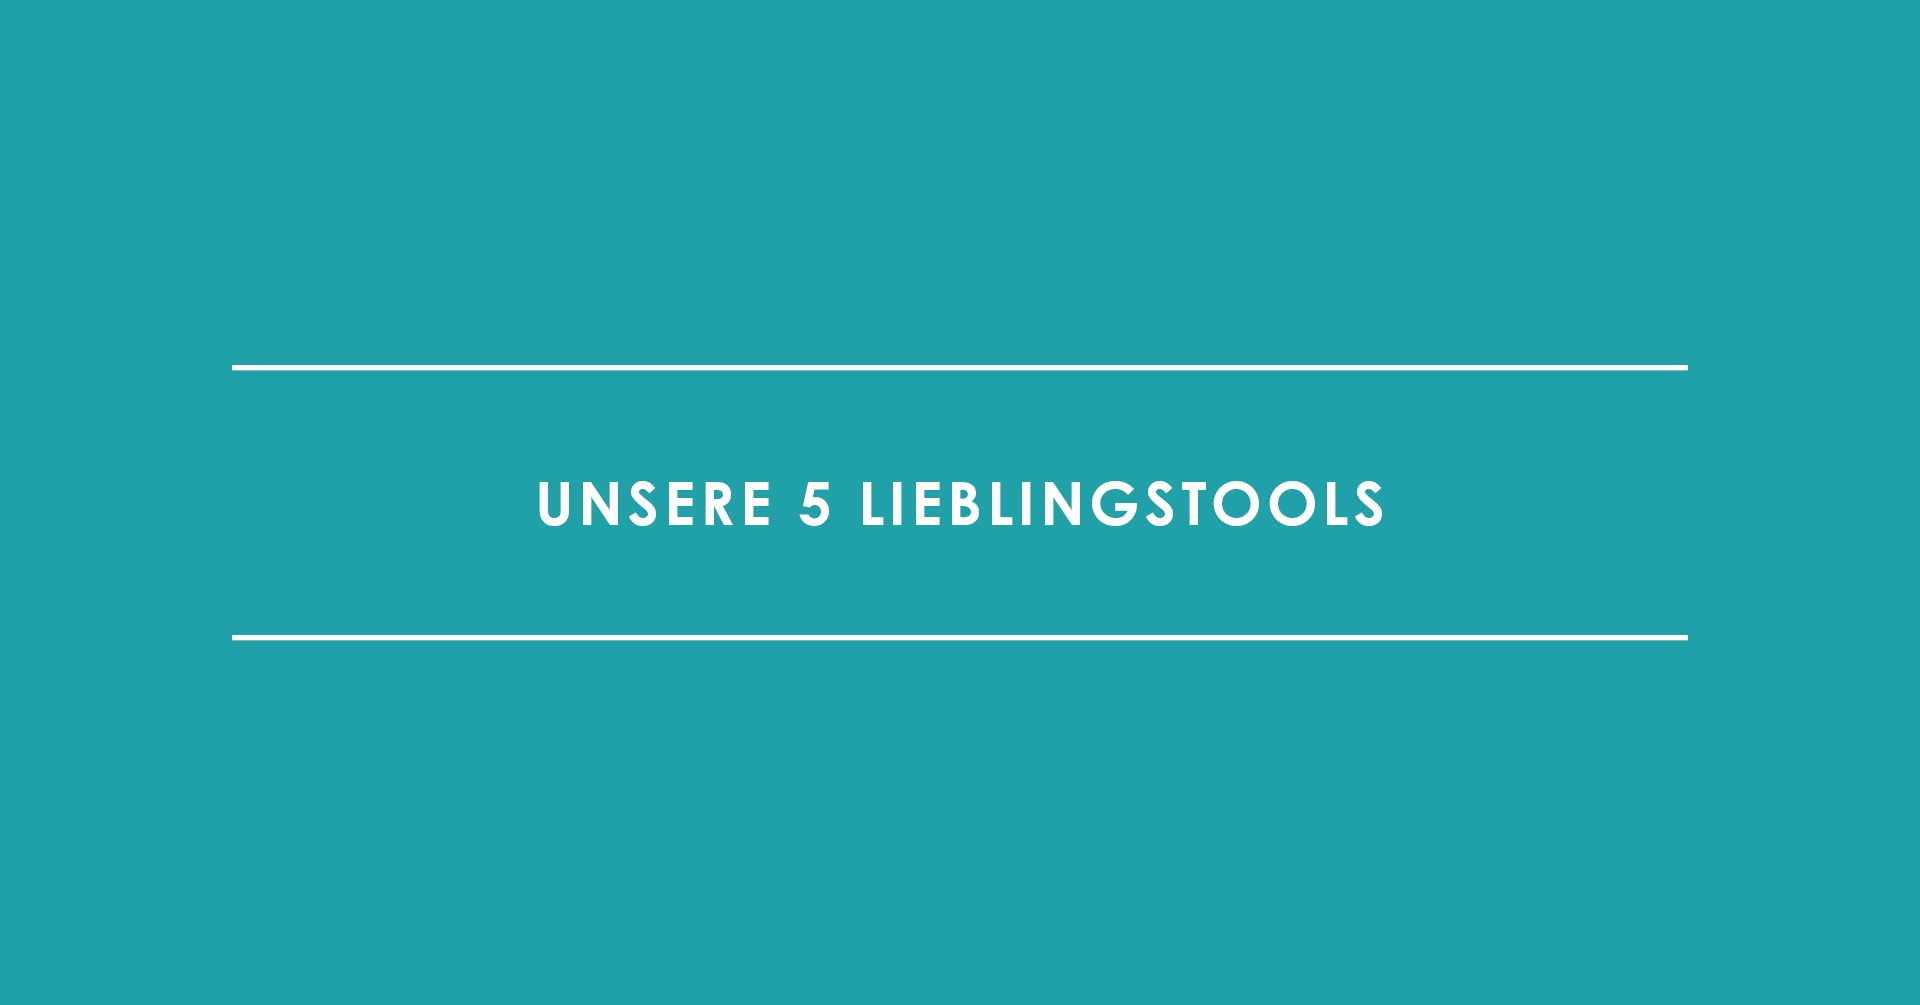 Content Curation: Unsere 5 Lieblingstools